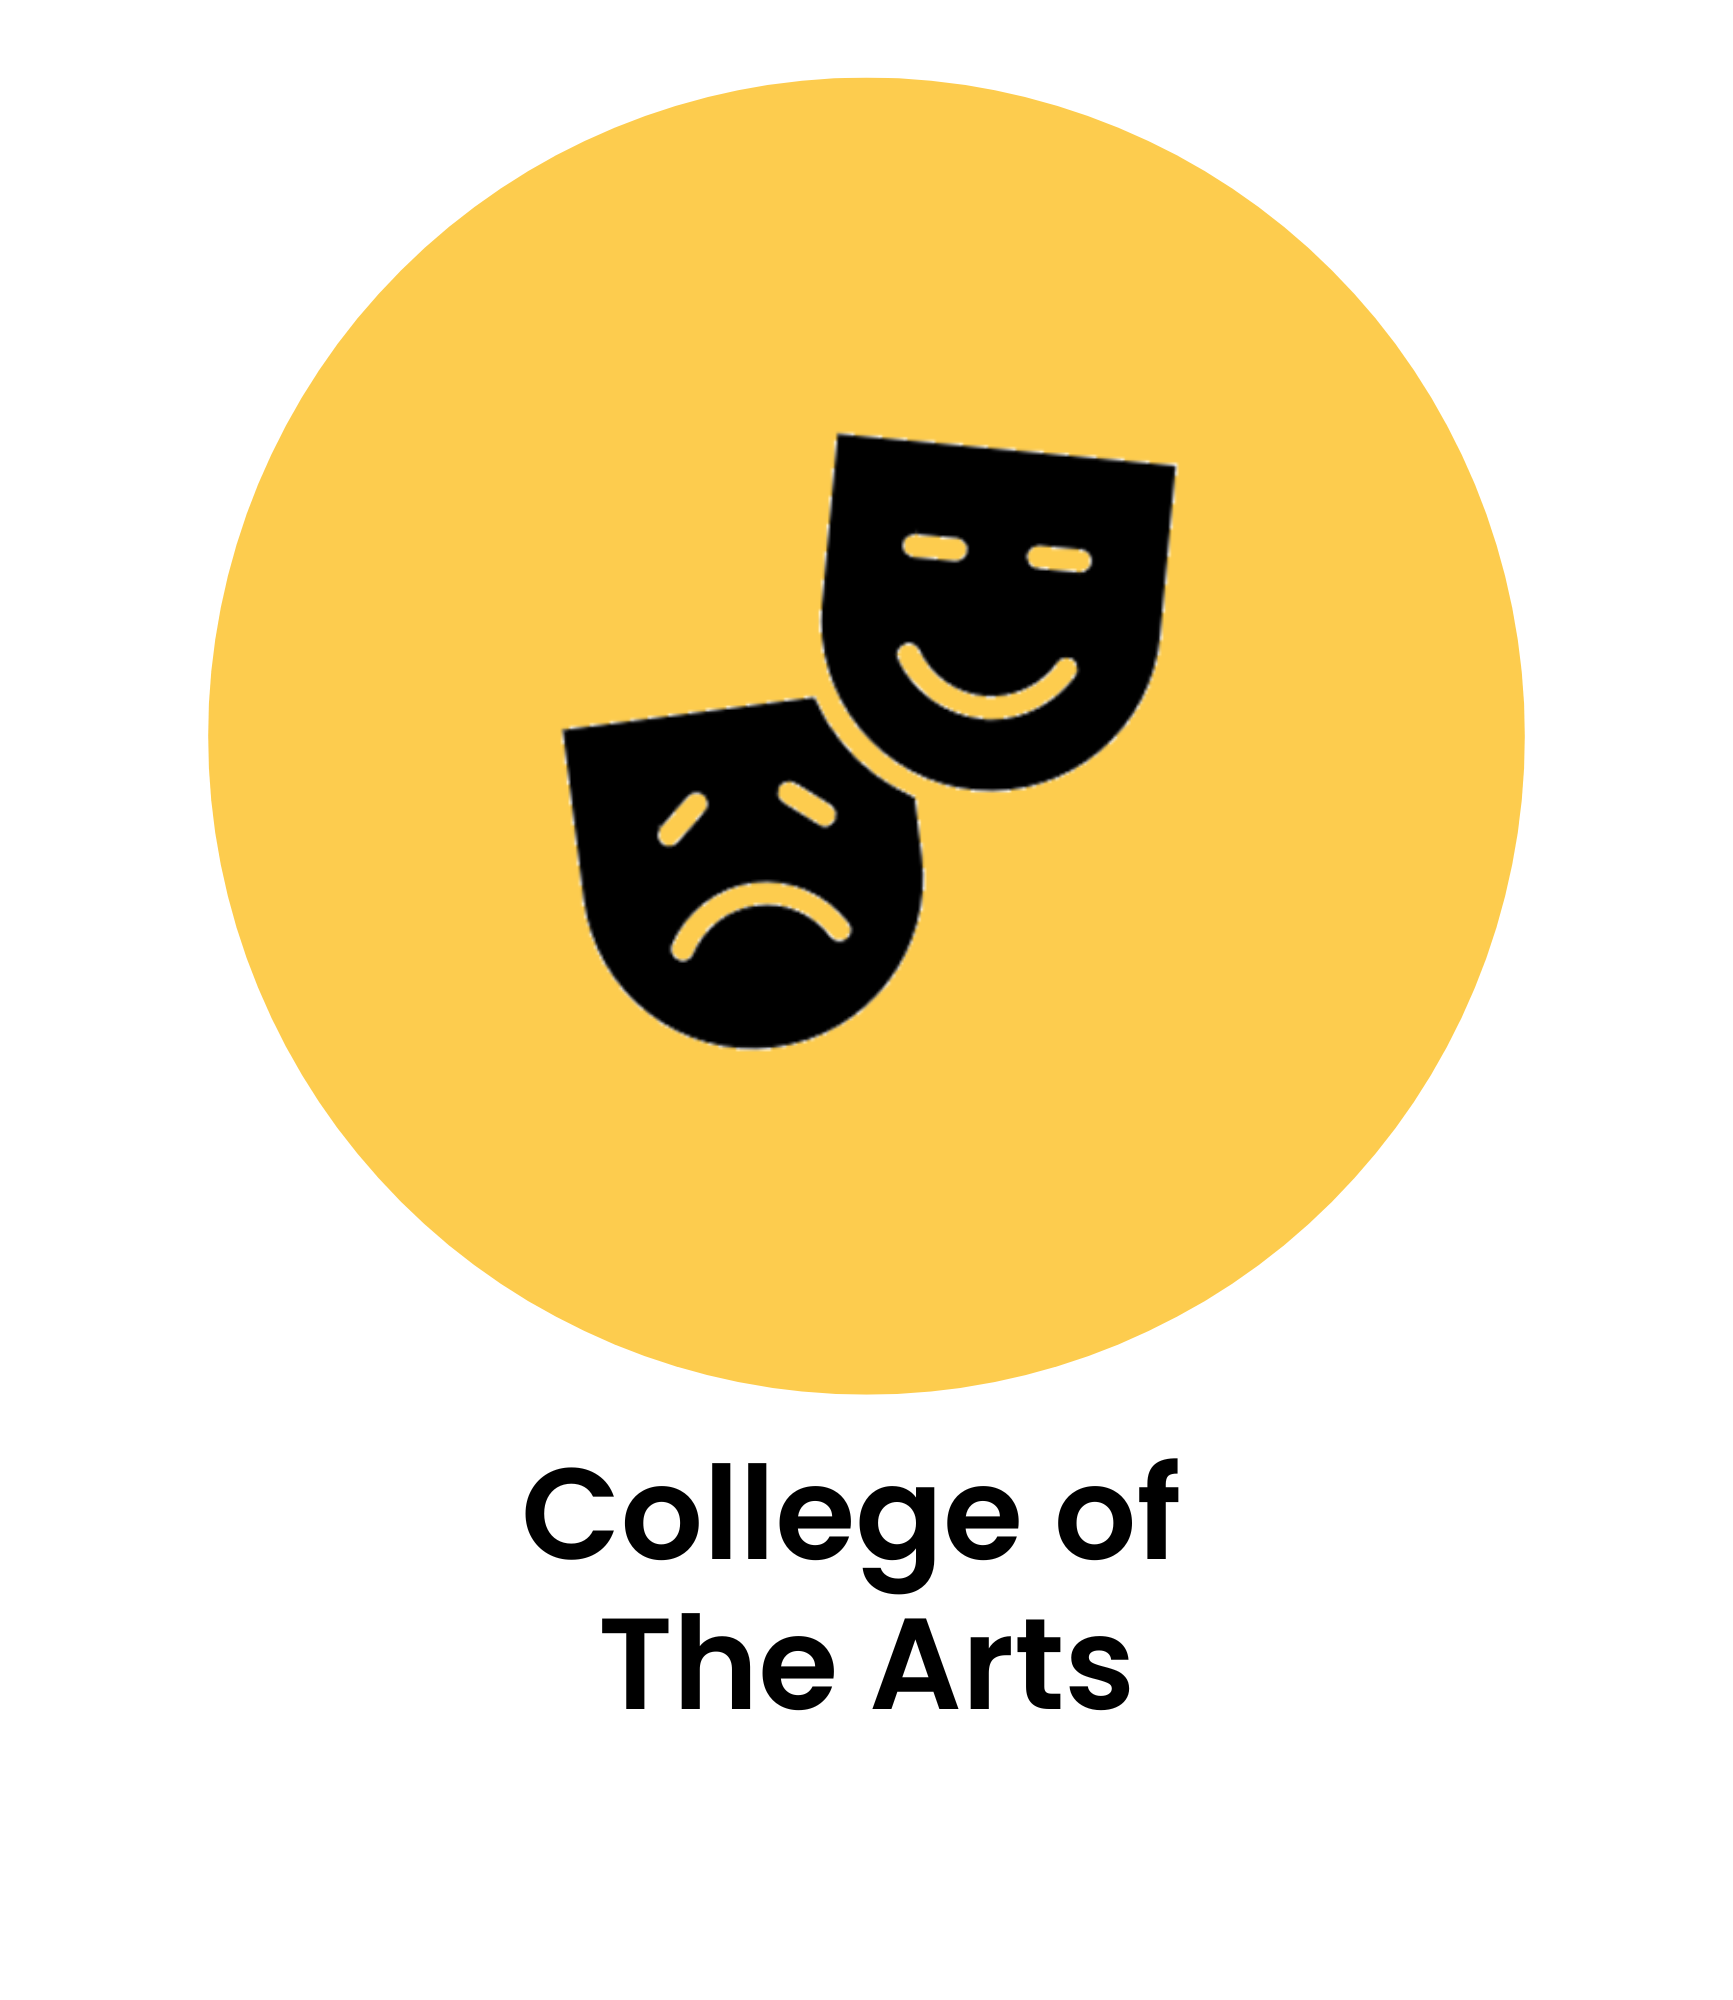 [text] College of The Arts